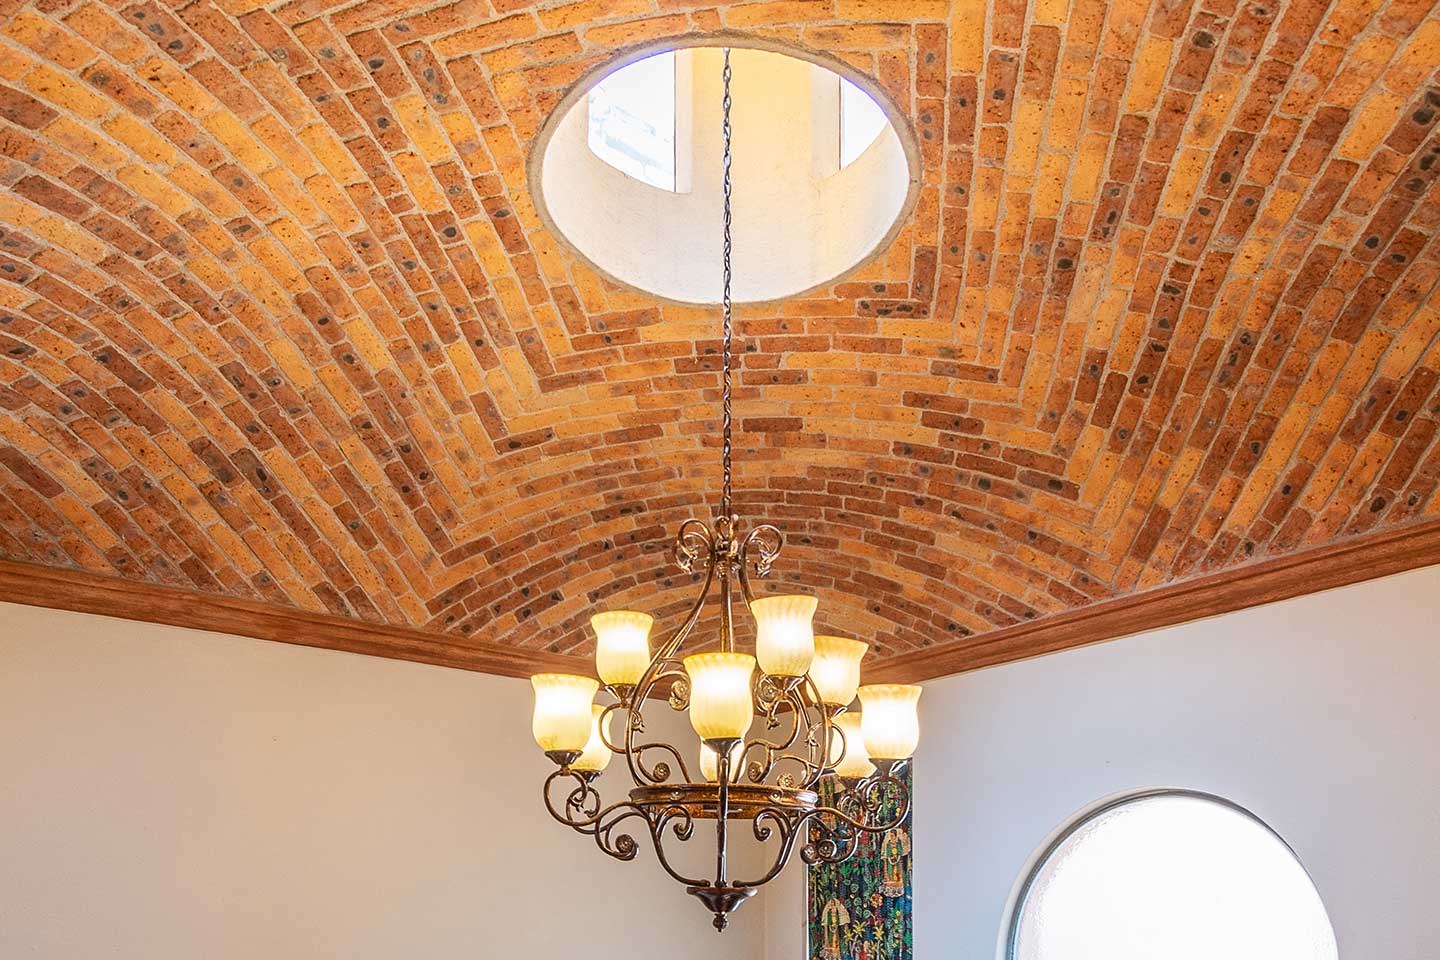 Photo of Salma Boveda Ceiling, Rounded Brick With Cupola (Light Well In The Middle)